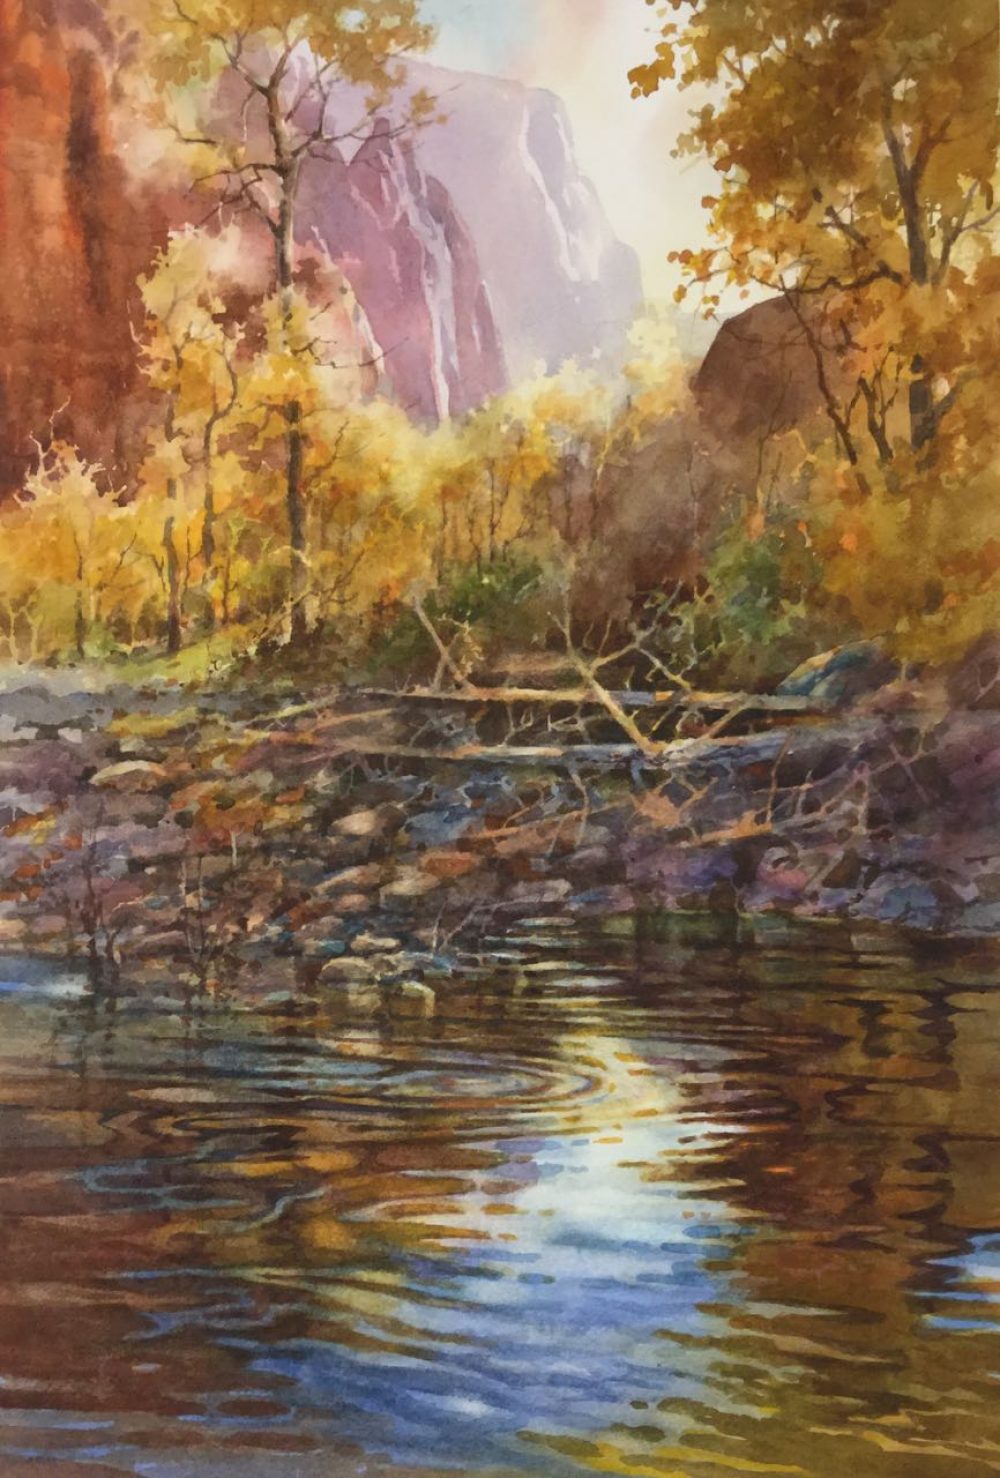 Ripples Along the Virgin - Watercolor Painting of The Virgin River in Zion National Park